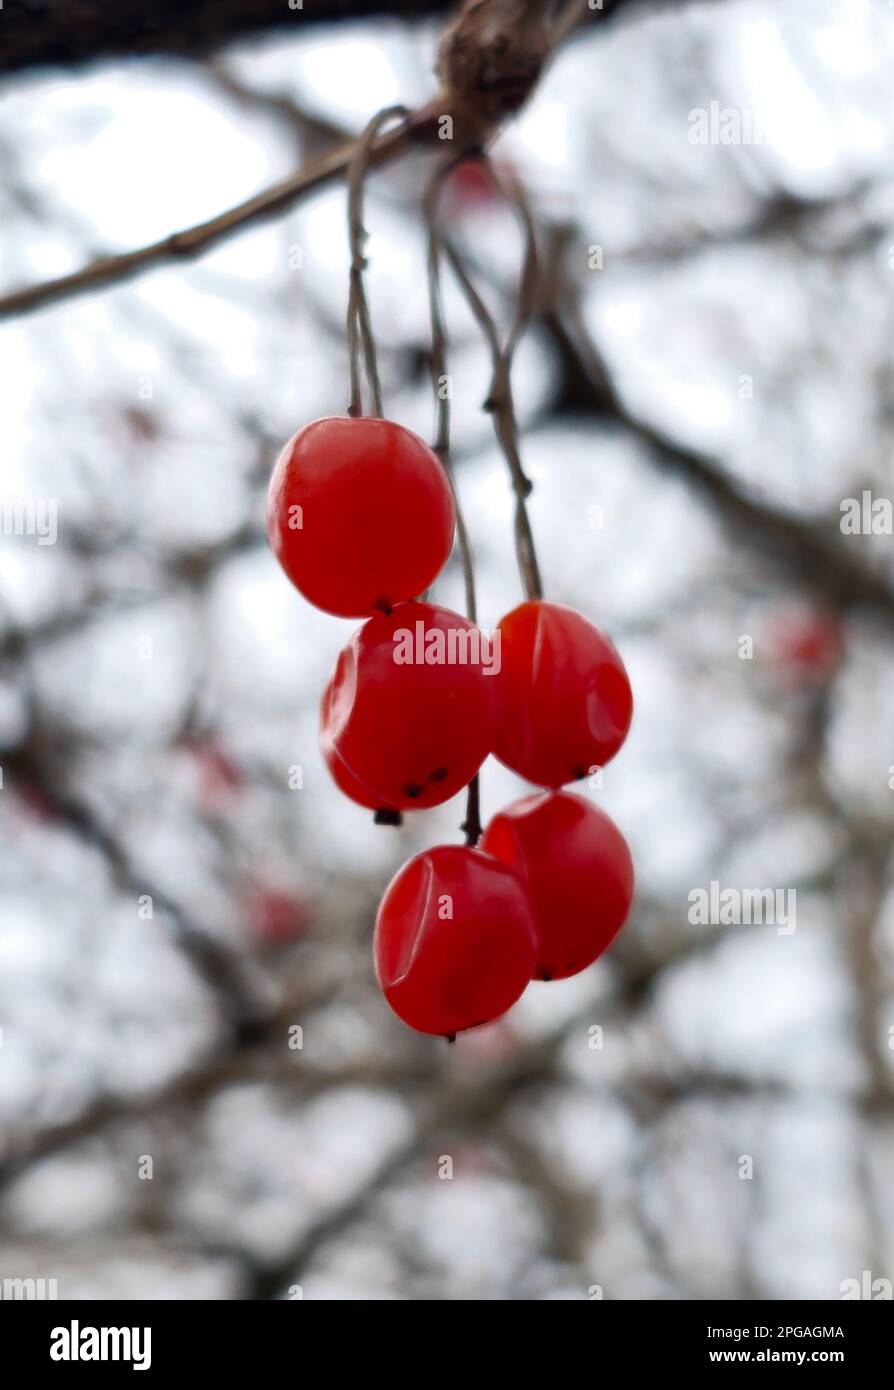 Coral viburnum or Viburnum opulus, branches without leaves, red fruit. Red berries of viburnum after winter on a blurred background. Spring season. Stock Photo